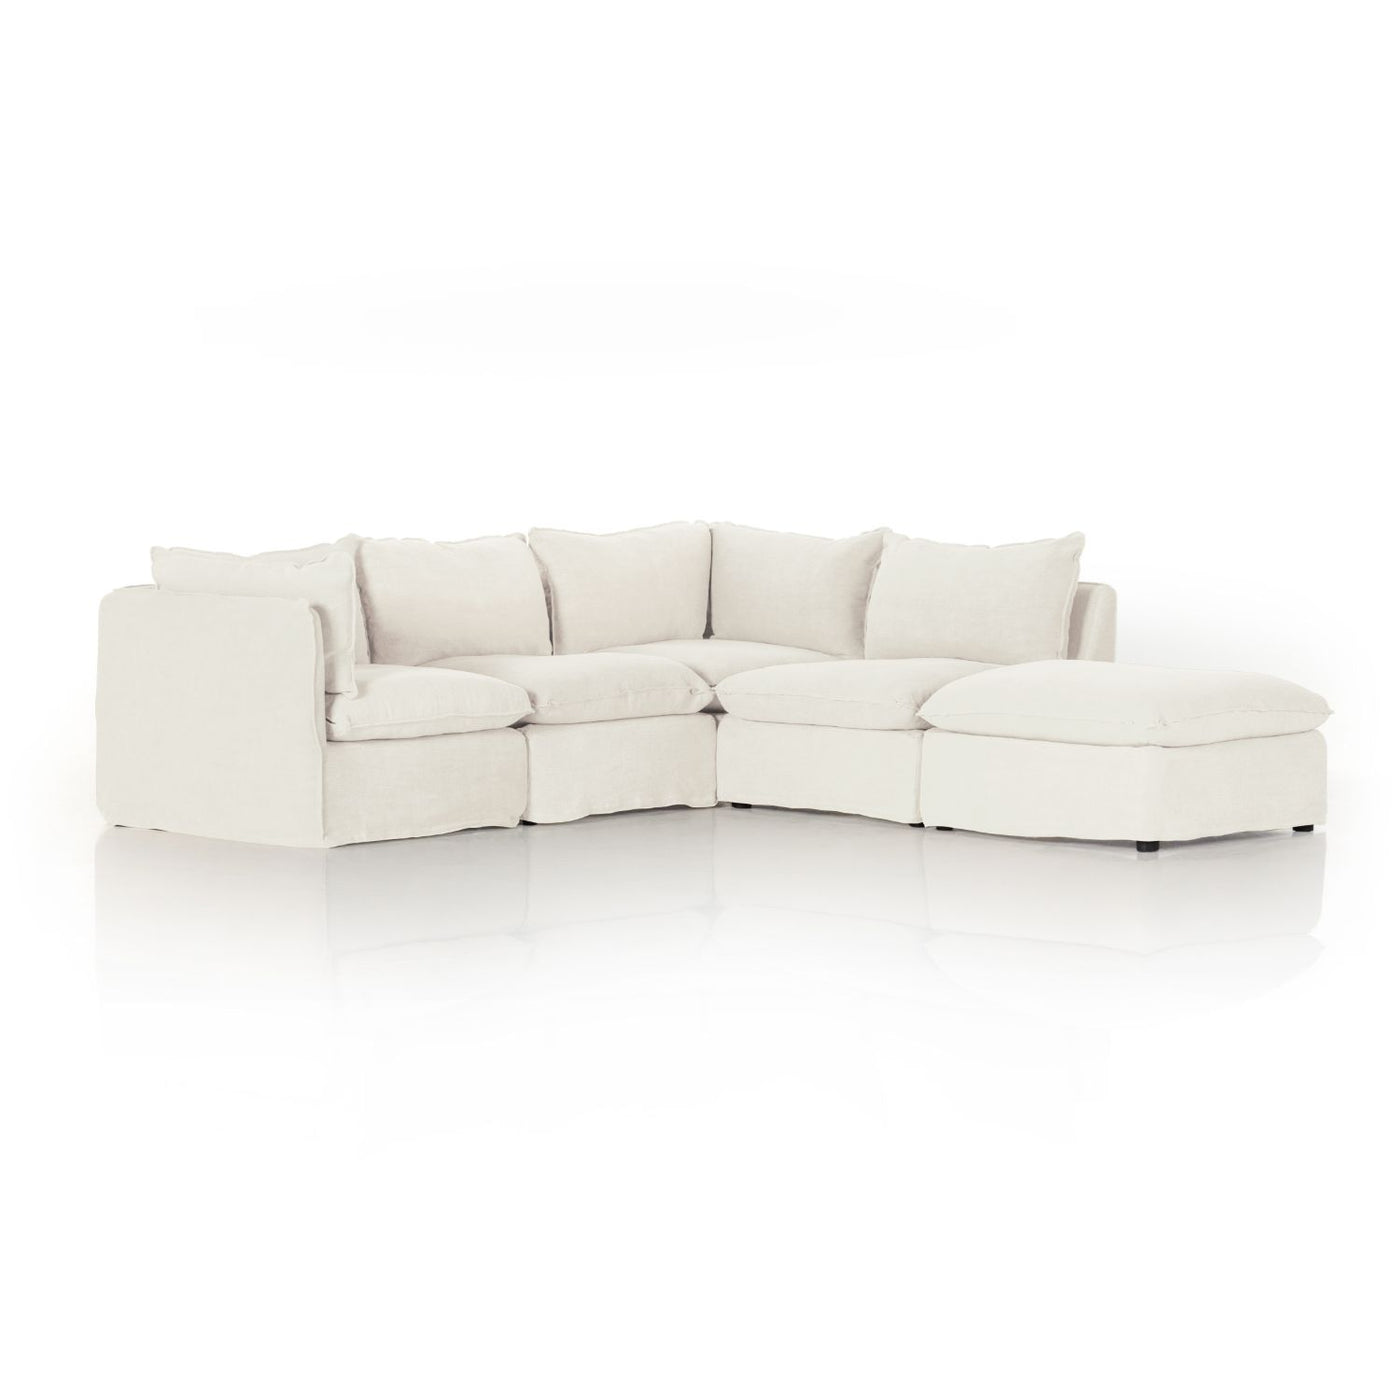 Andre Slipcover 4 Pc Sectional W/ Ottoman